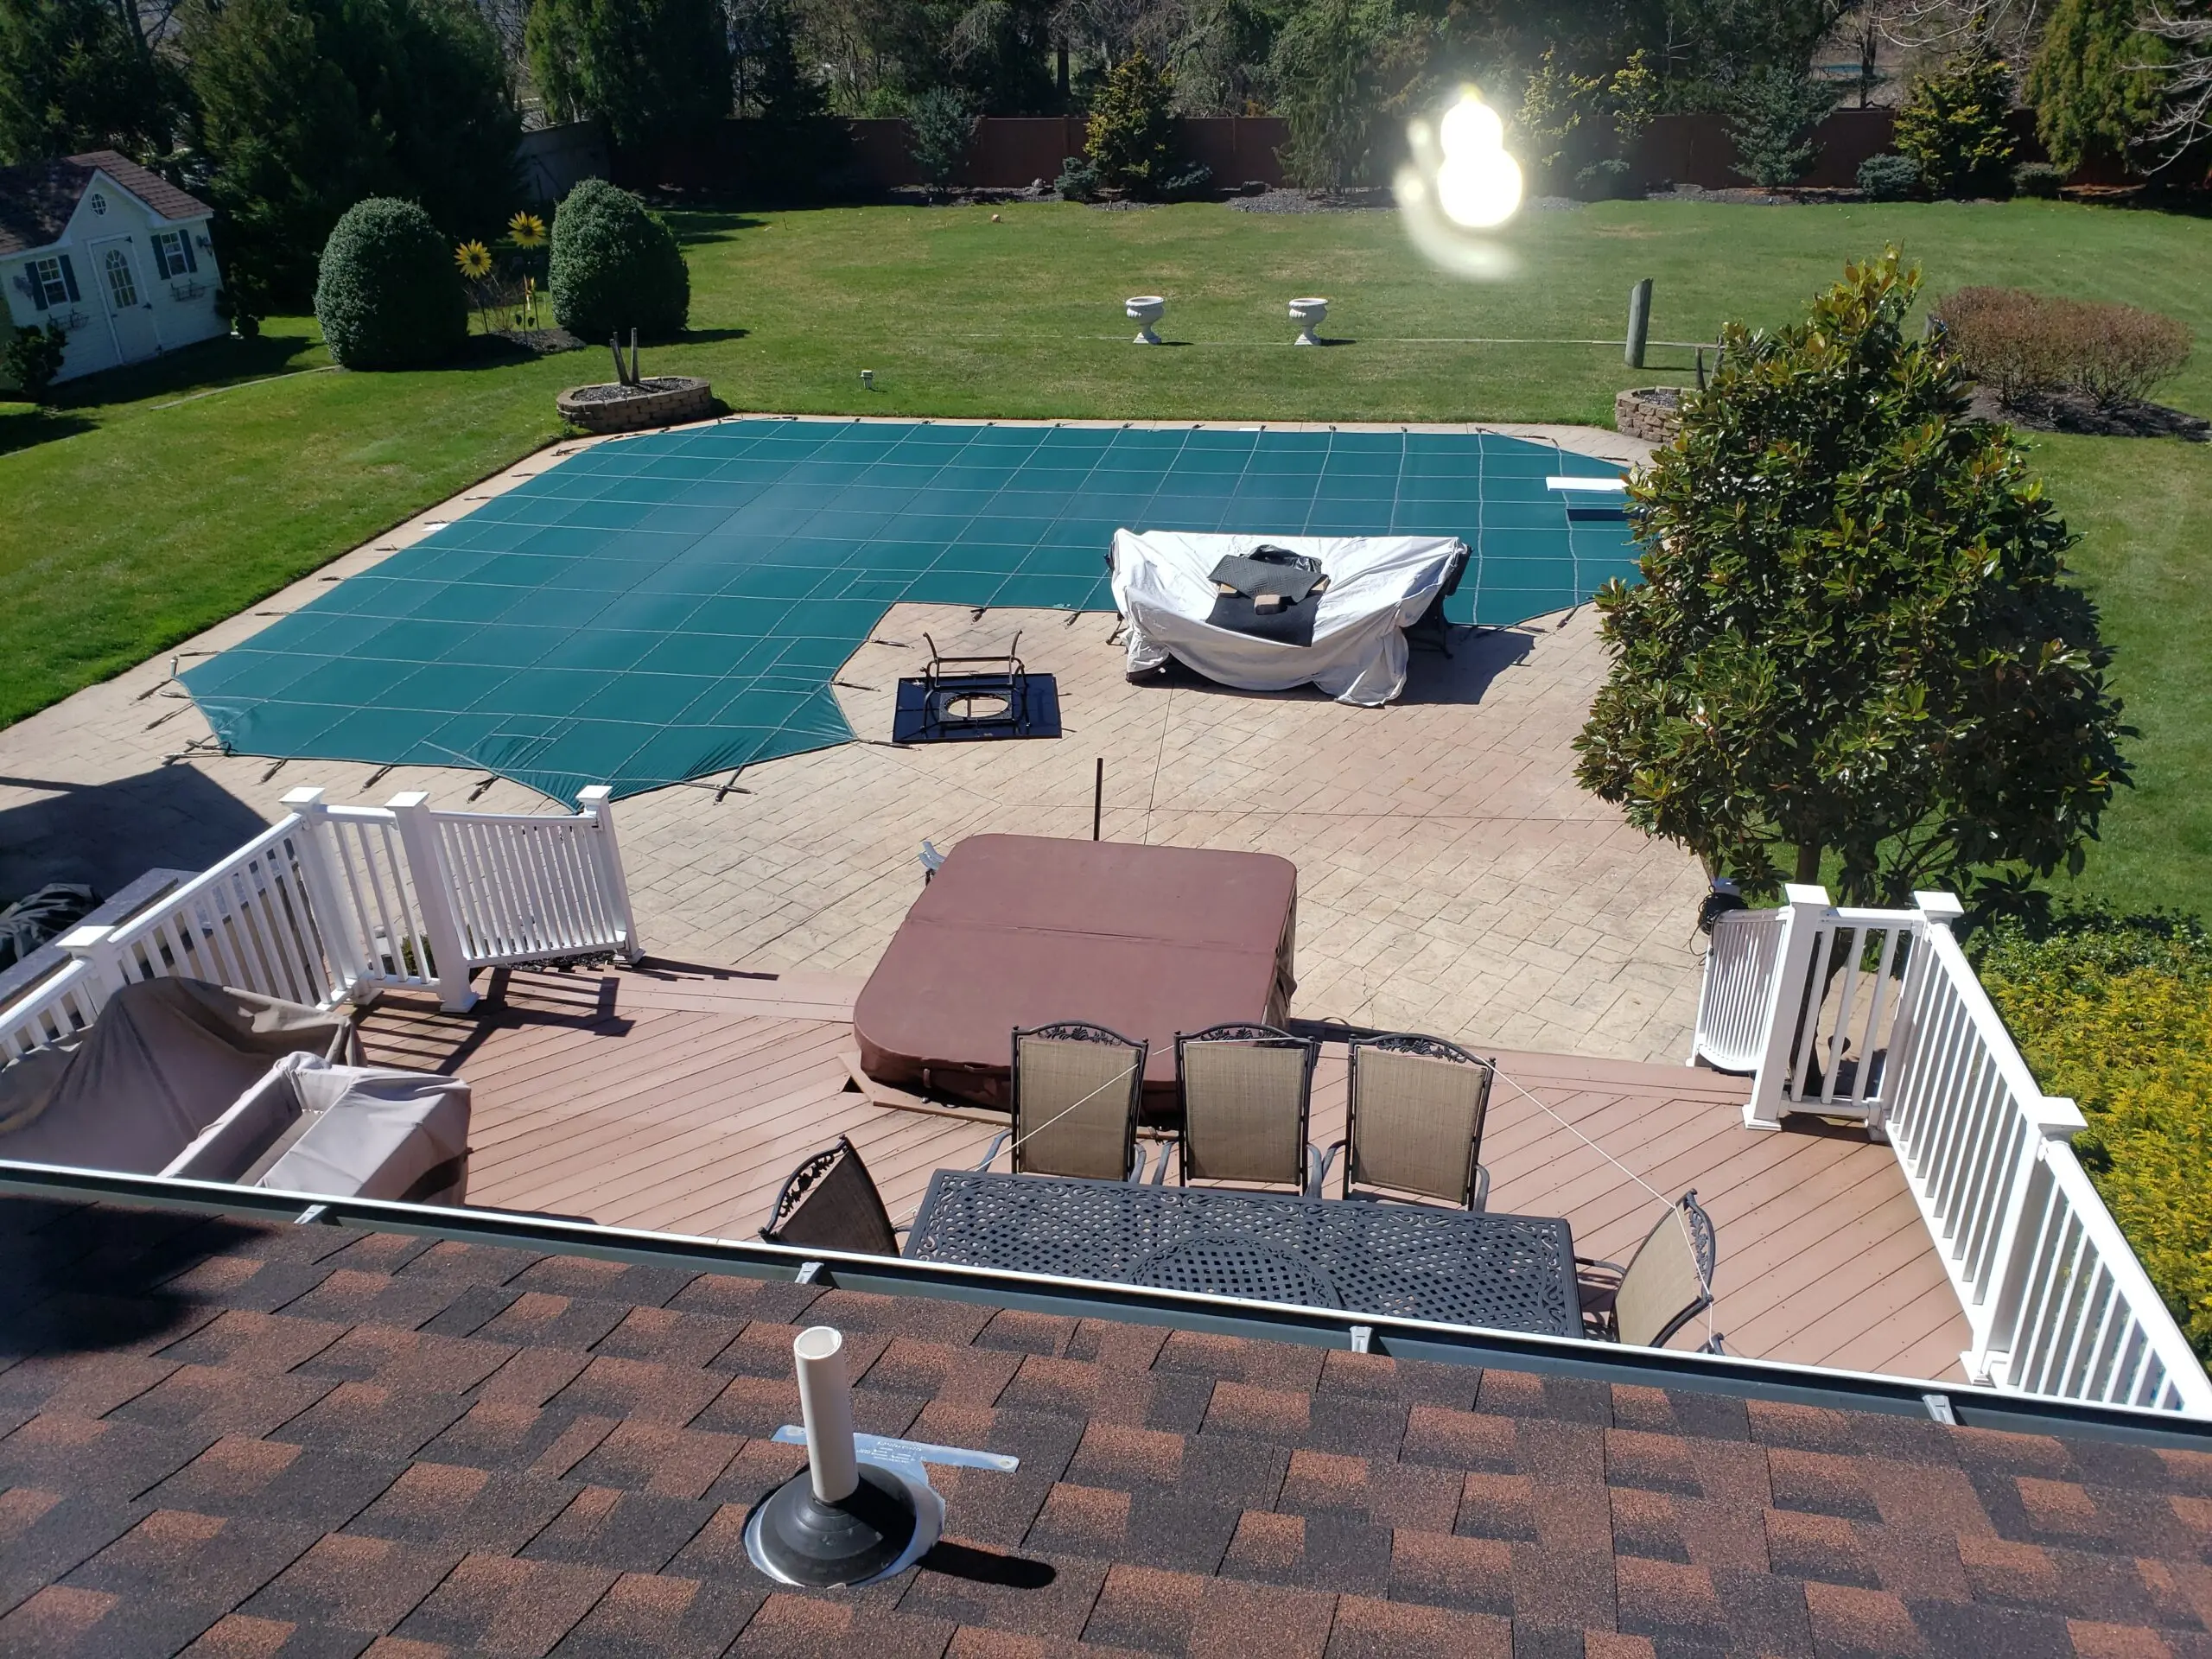 Pre-stain photo of the stamped concrete pool deck, last stained a decade ago and showing visible wear and cracks